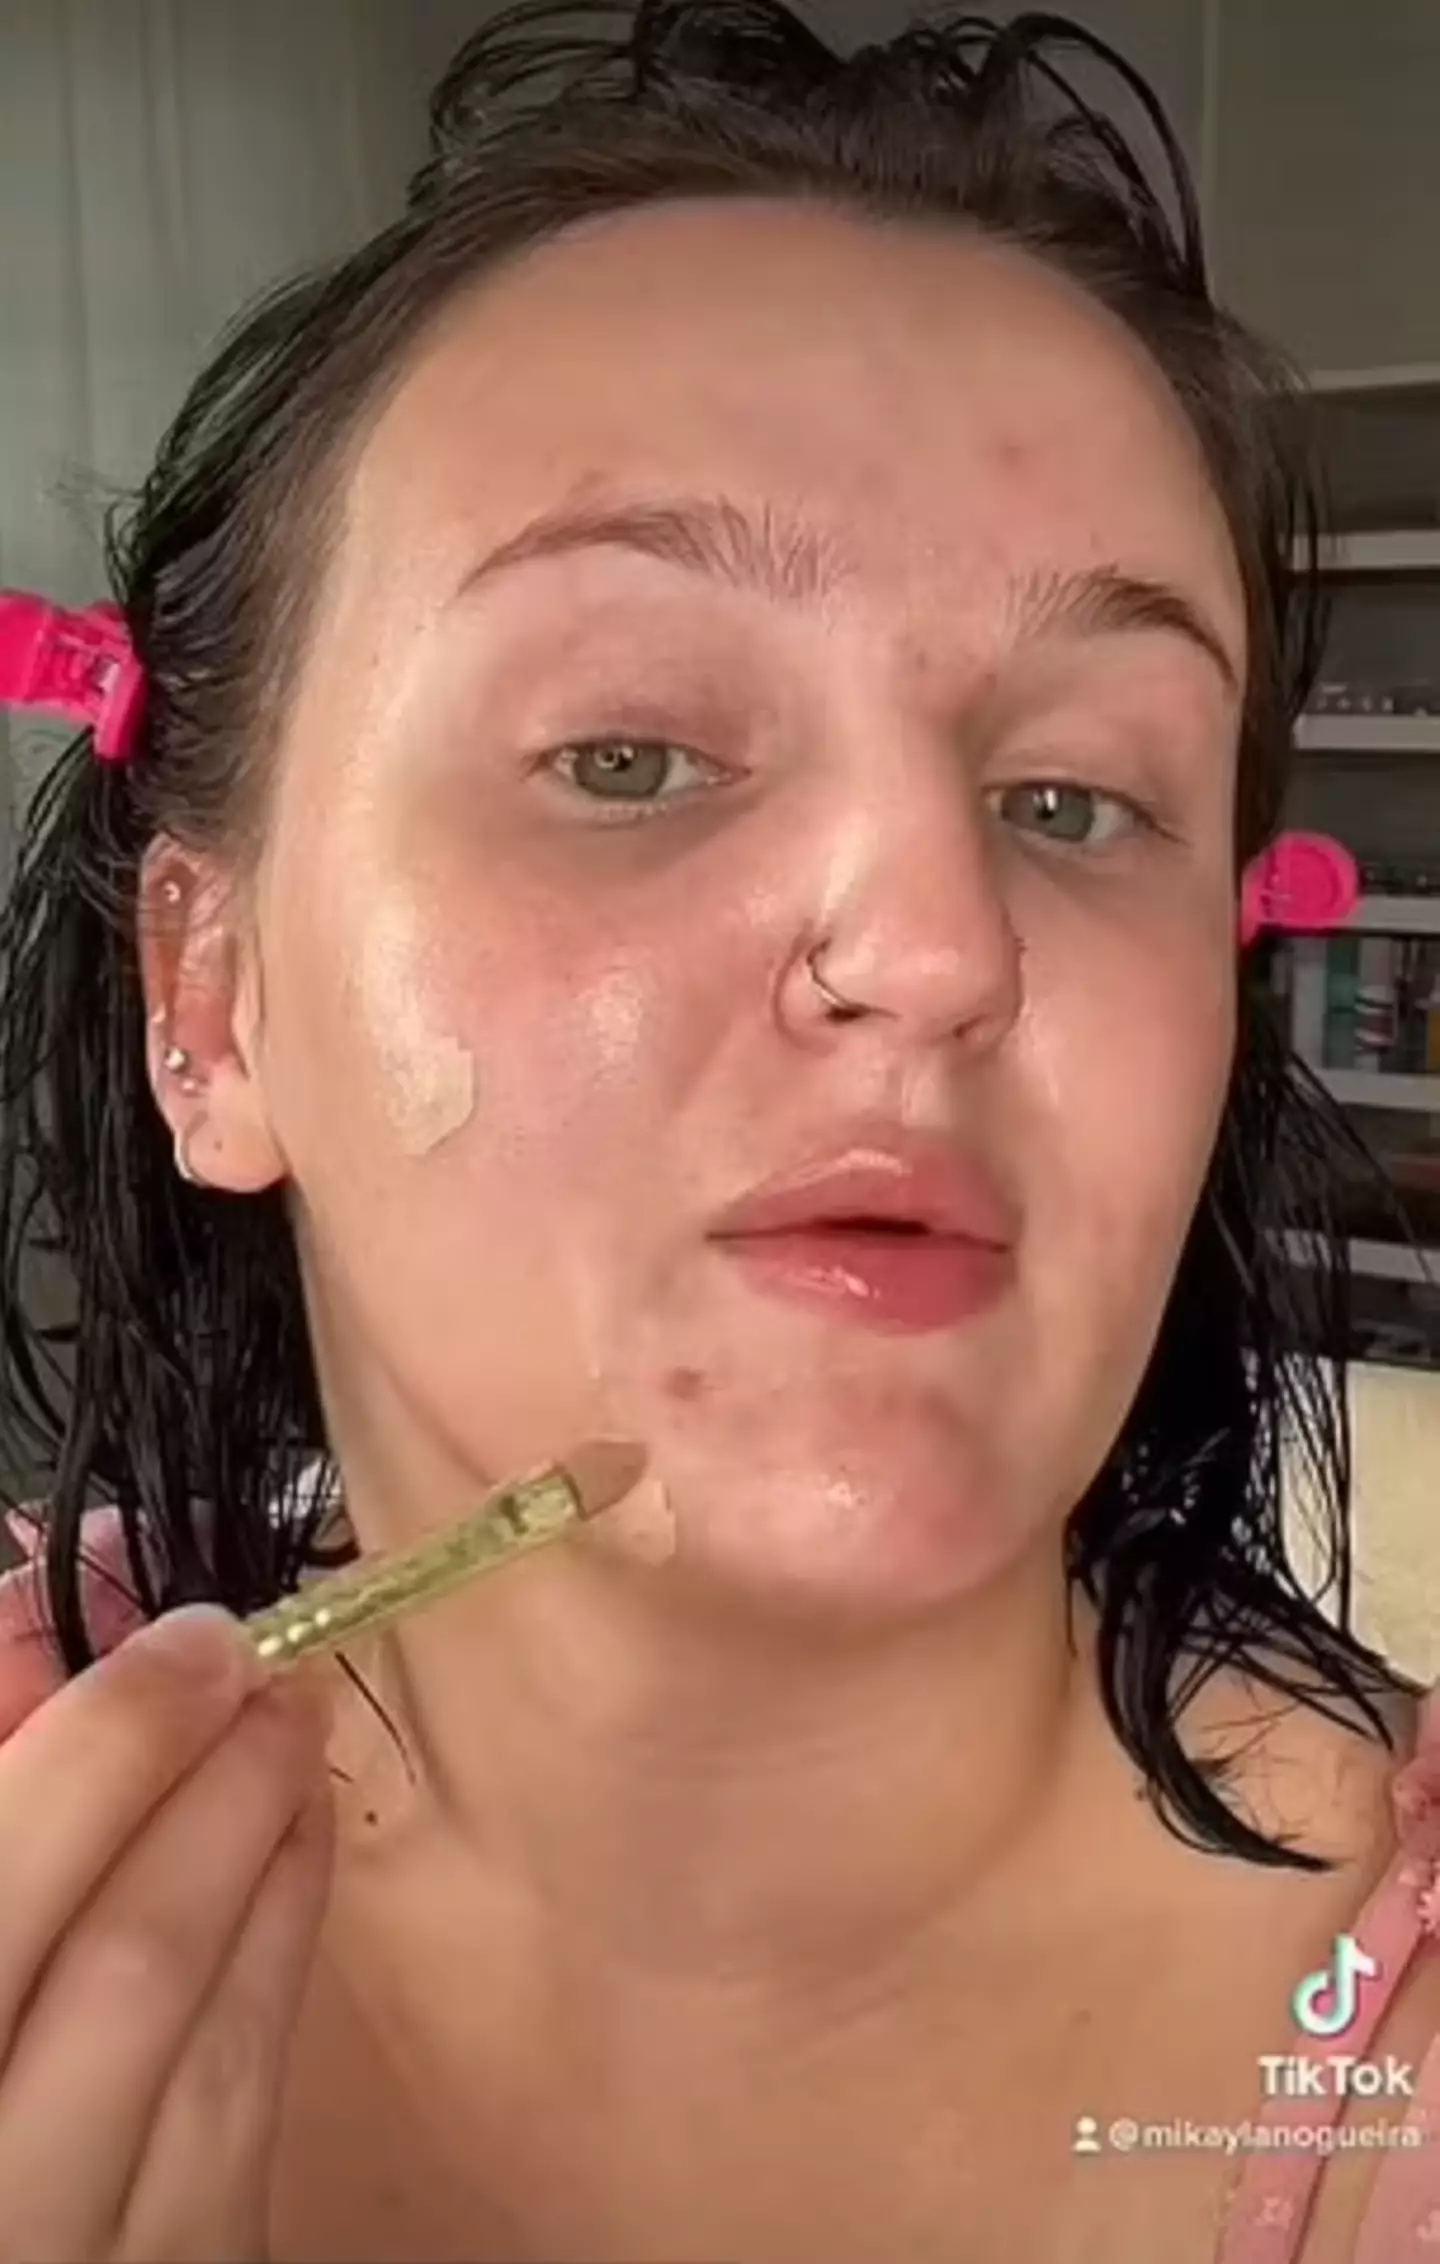 Mikayla recommends using a brush to apply concealer.